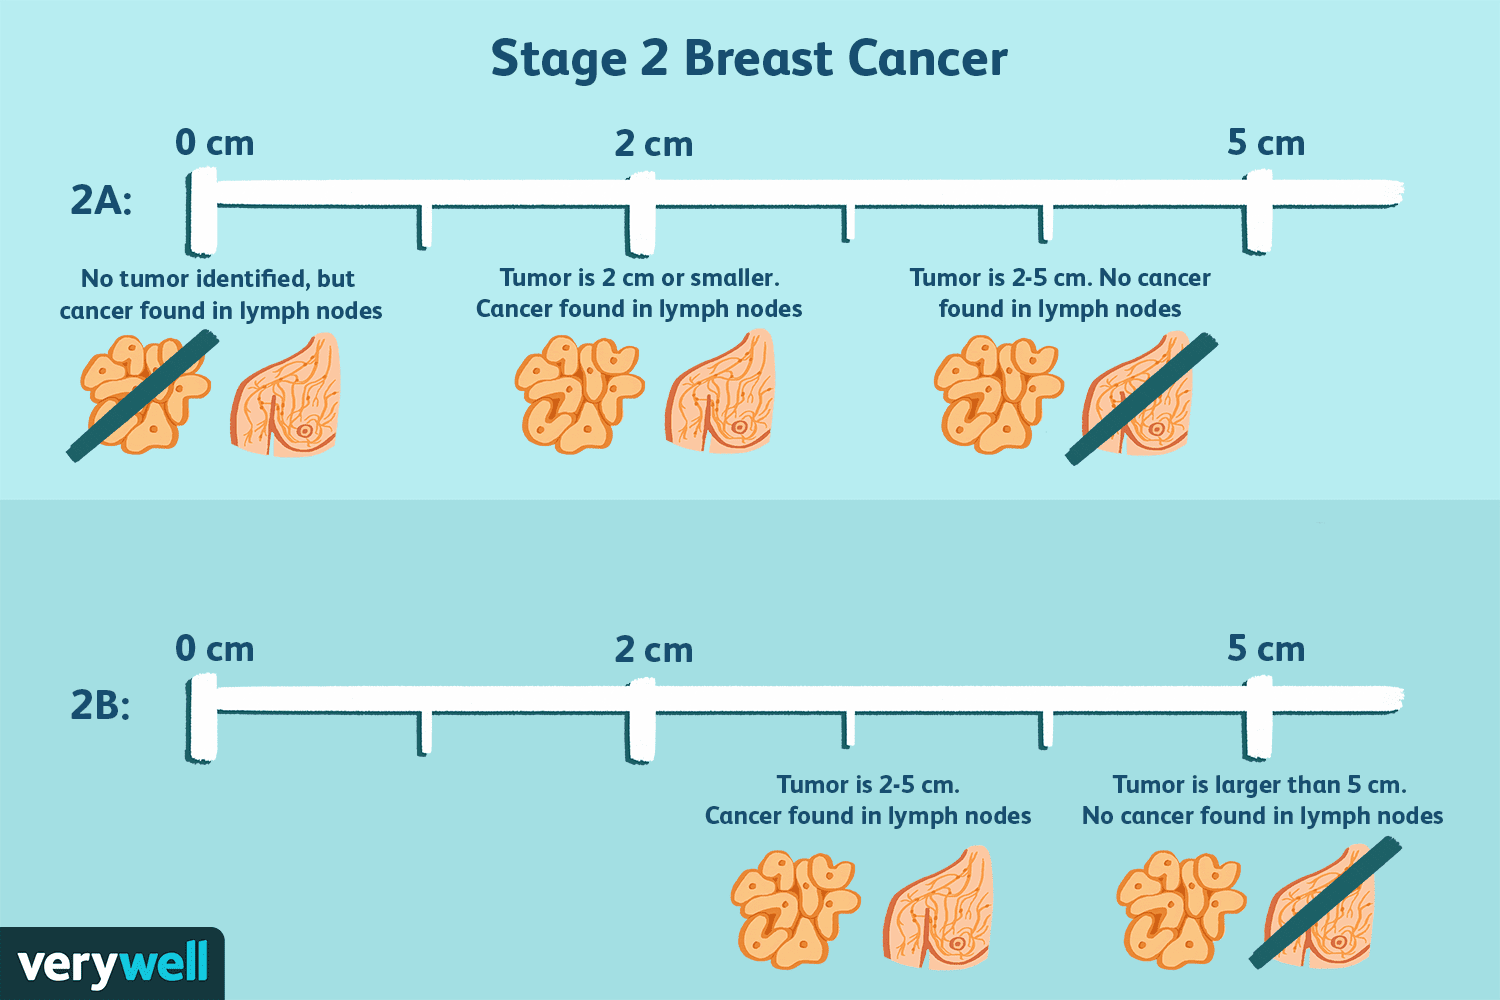 Stage 2 Breast Cancer: Diagnosis, Treatment, Survival